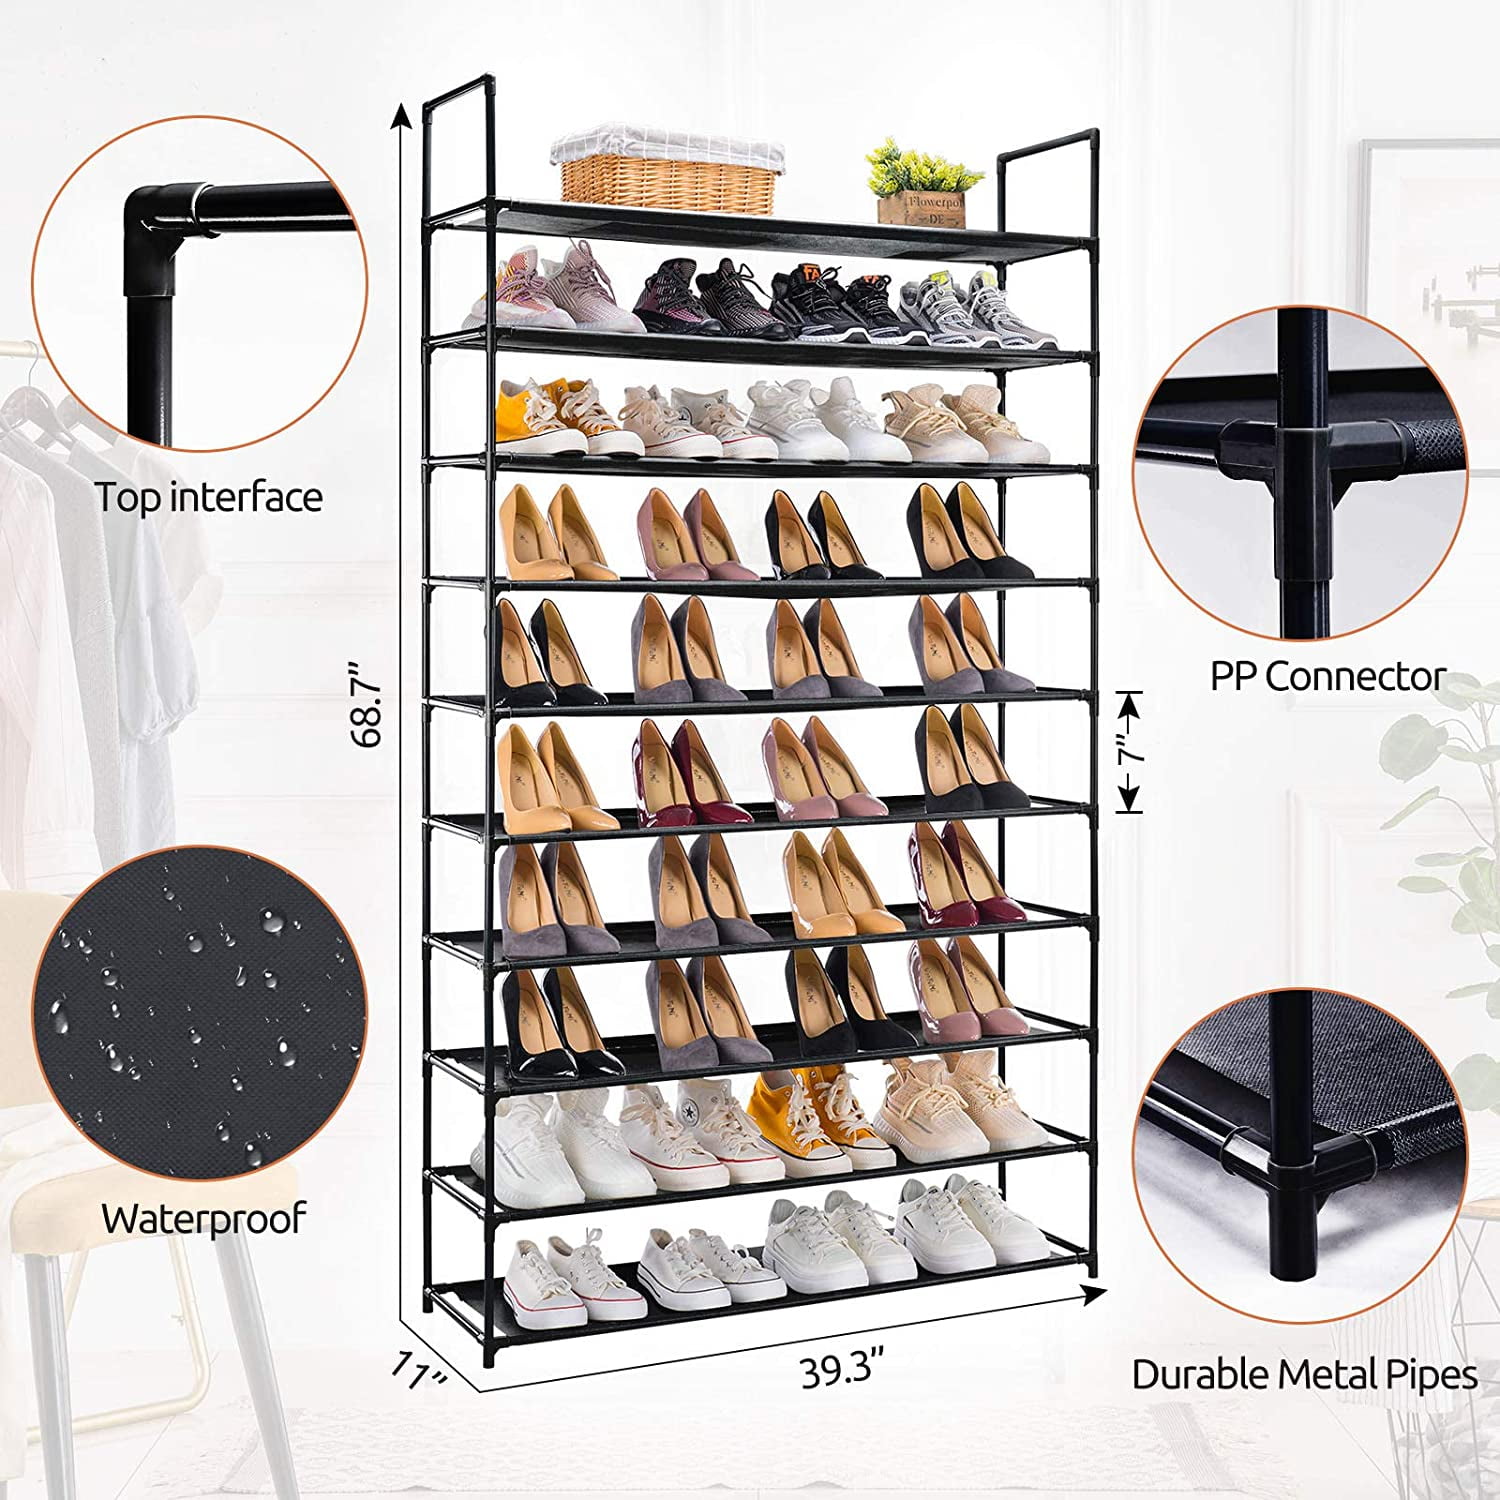 LVNIUS Large Tall Shoe Rack With Covers Shoes Closet 9-Tier 40-46 Pairs,  Sneaker Organizer Cabinet Closed Shoe Shelves Shoe Stand Holder For Garage